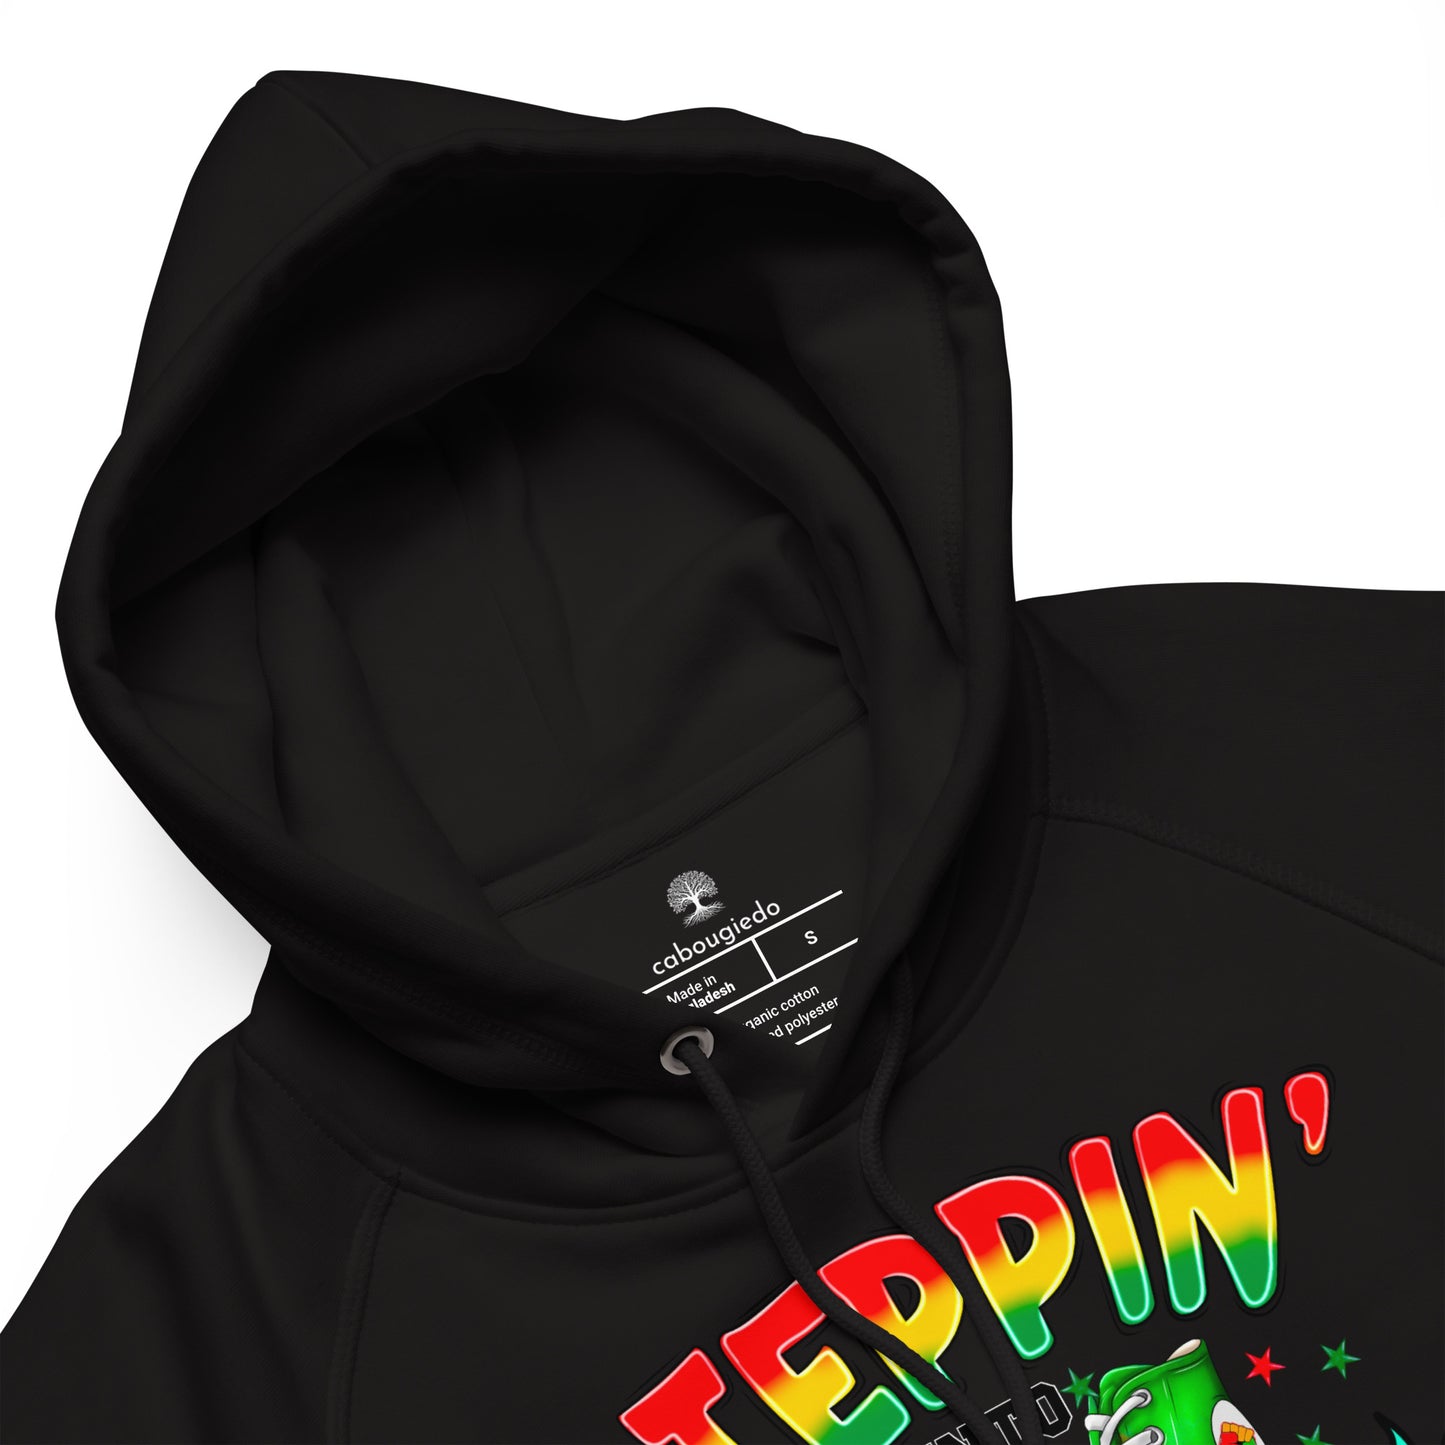 Unisex pullover hoodie - Steppin Into Black History Month